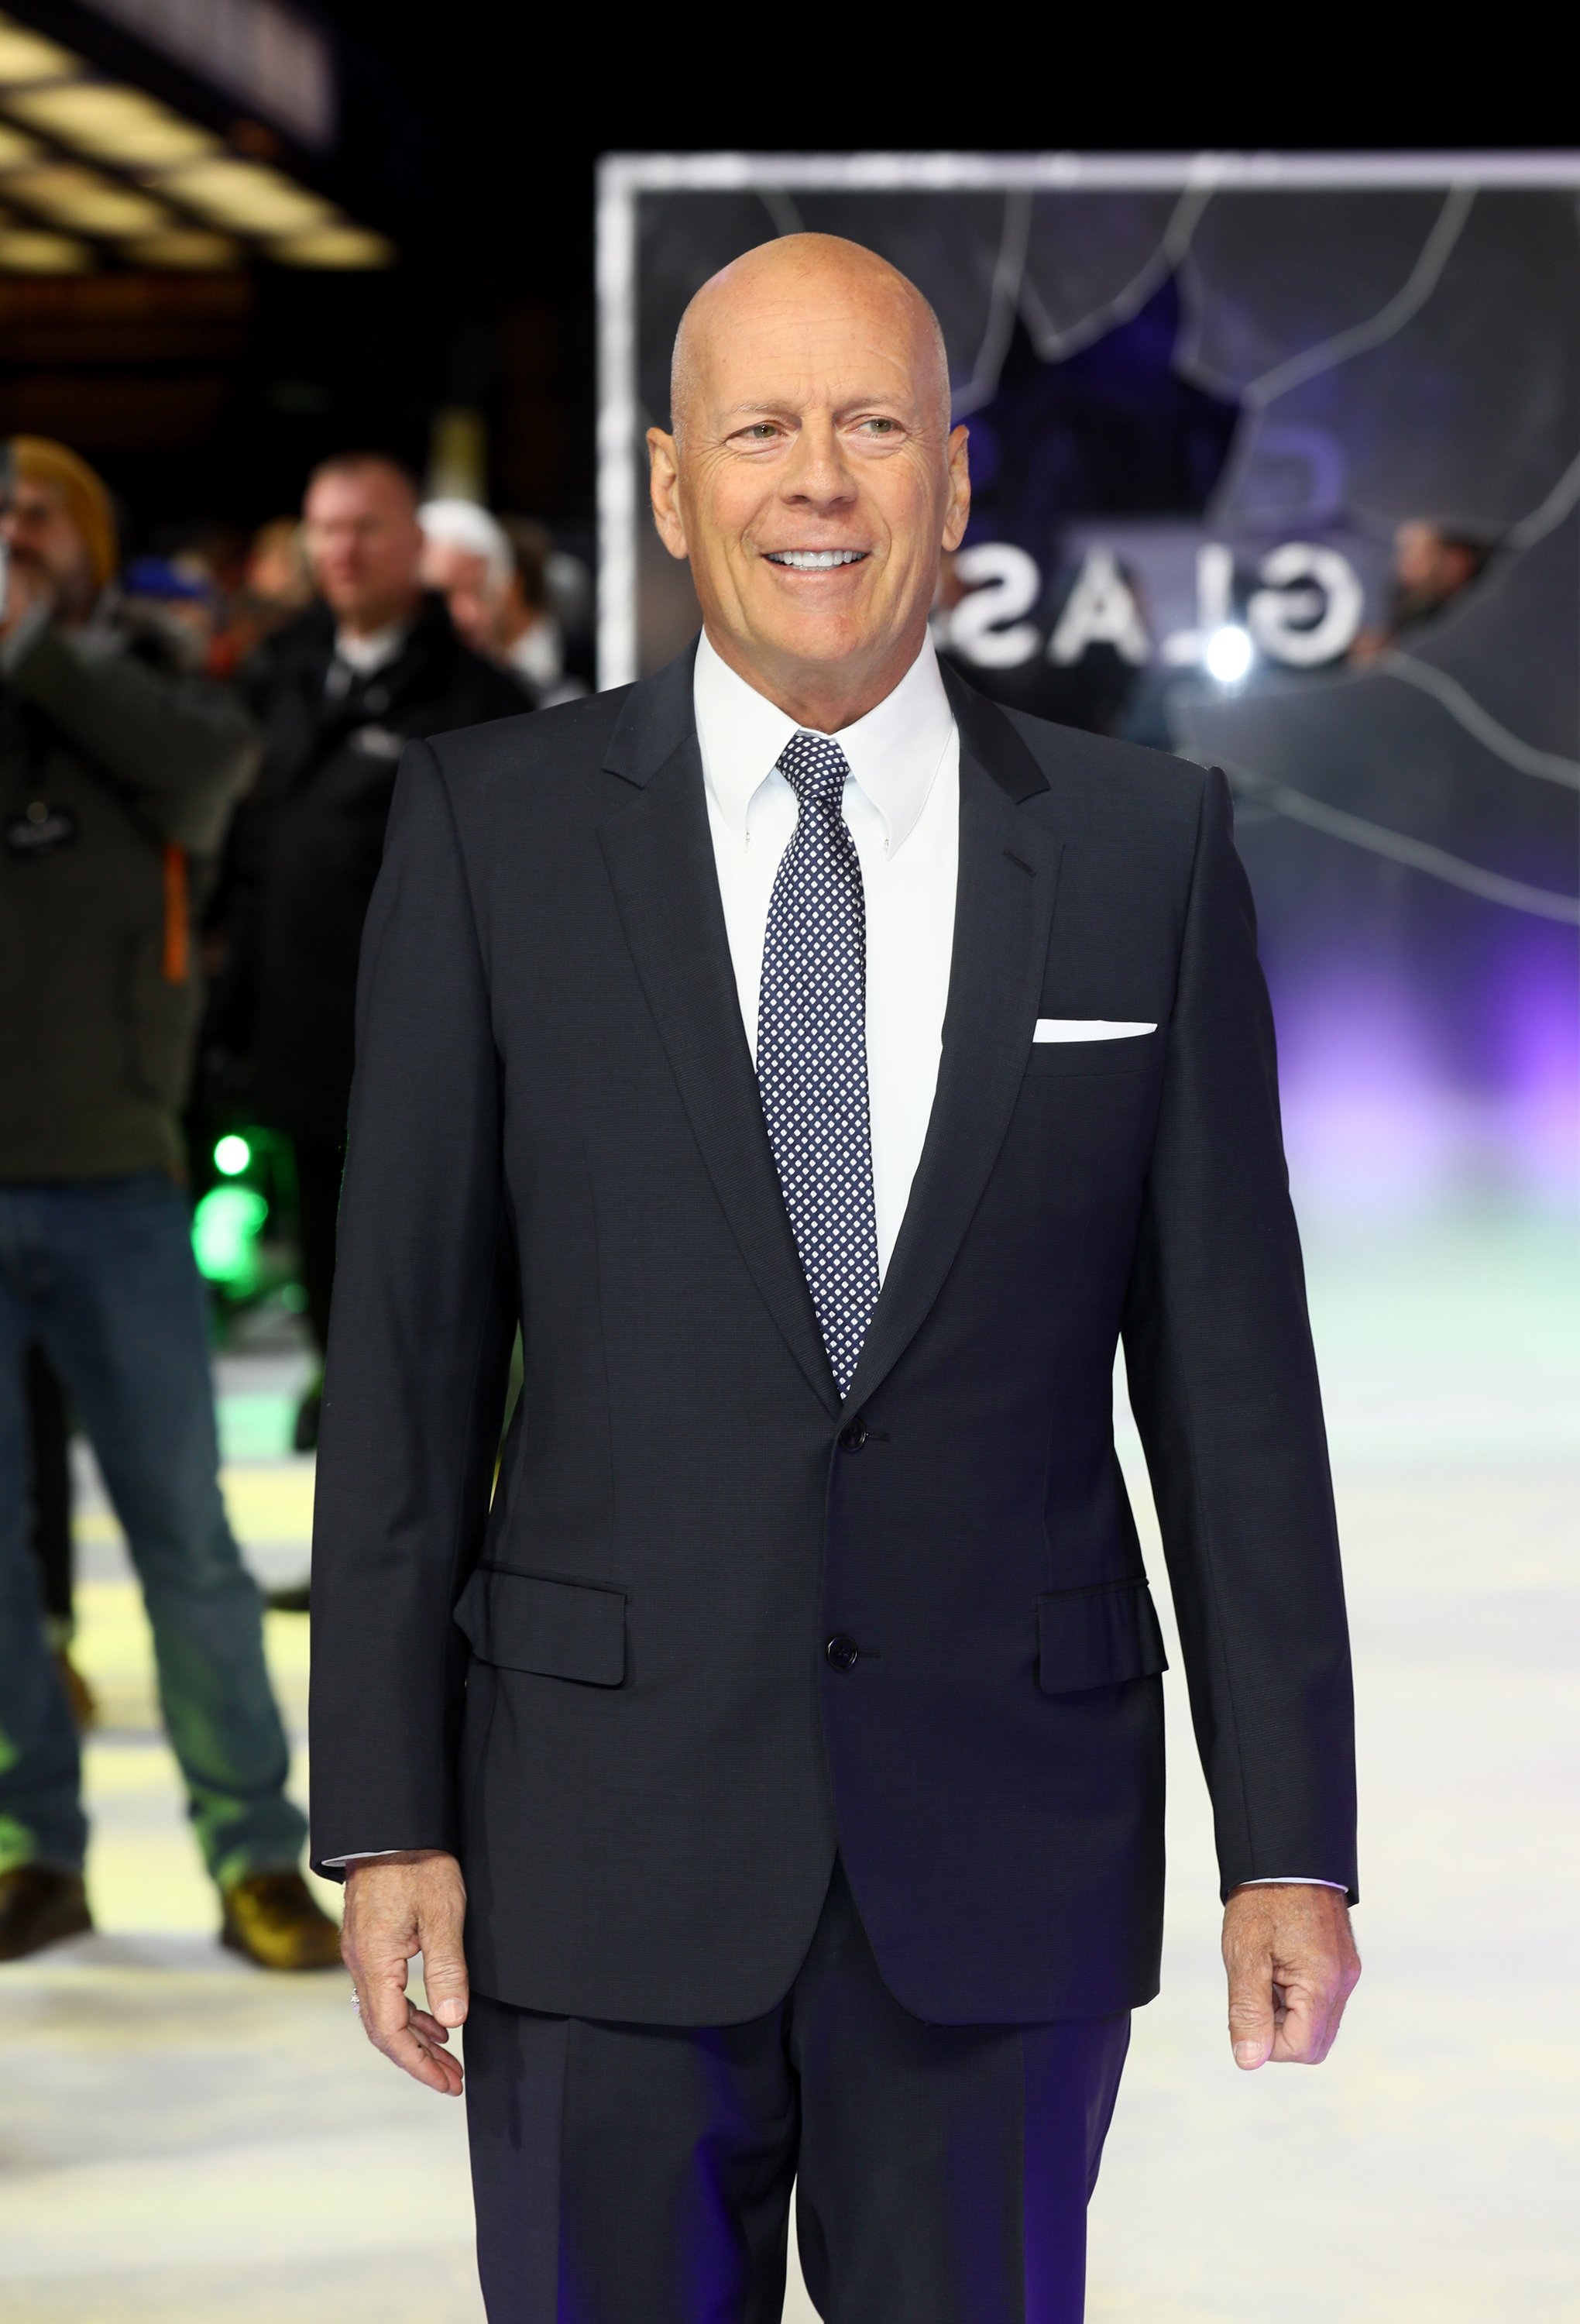  Bruce Willis at the UK Premiere of M. Night Shyamalan's all-new comic-book thriller "Glass" at Curzon Cinema Mayfair on January 9, 2019 | Photo: Getty Images